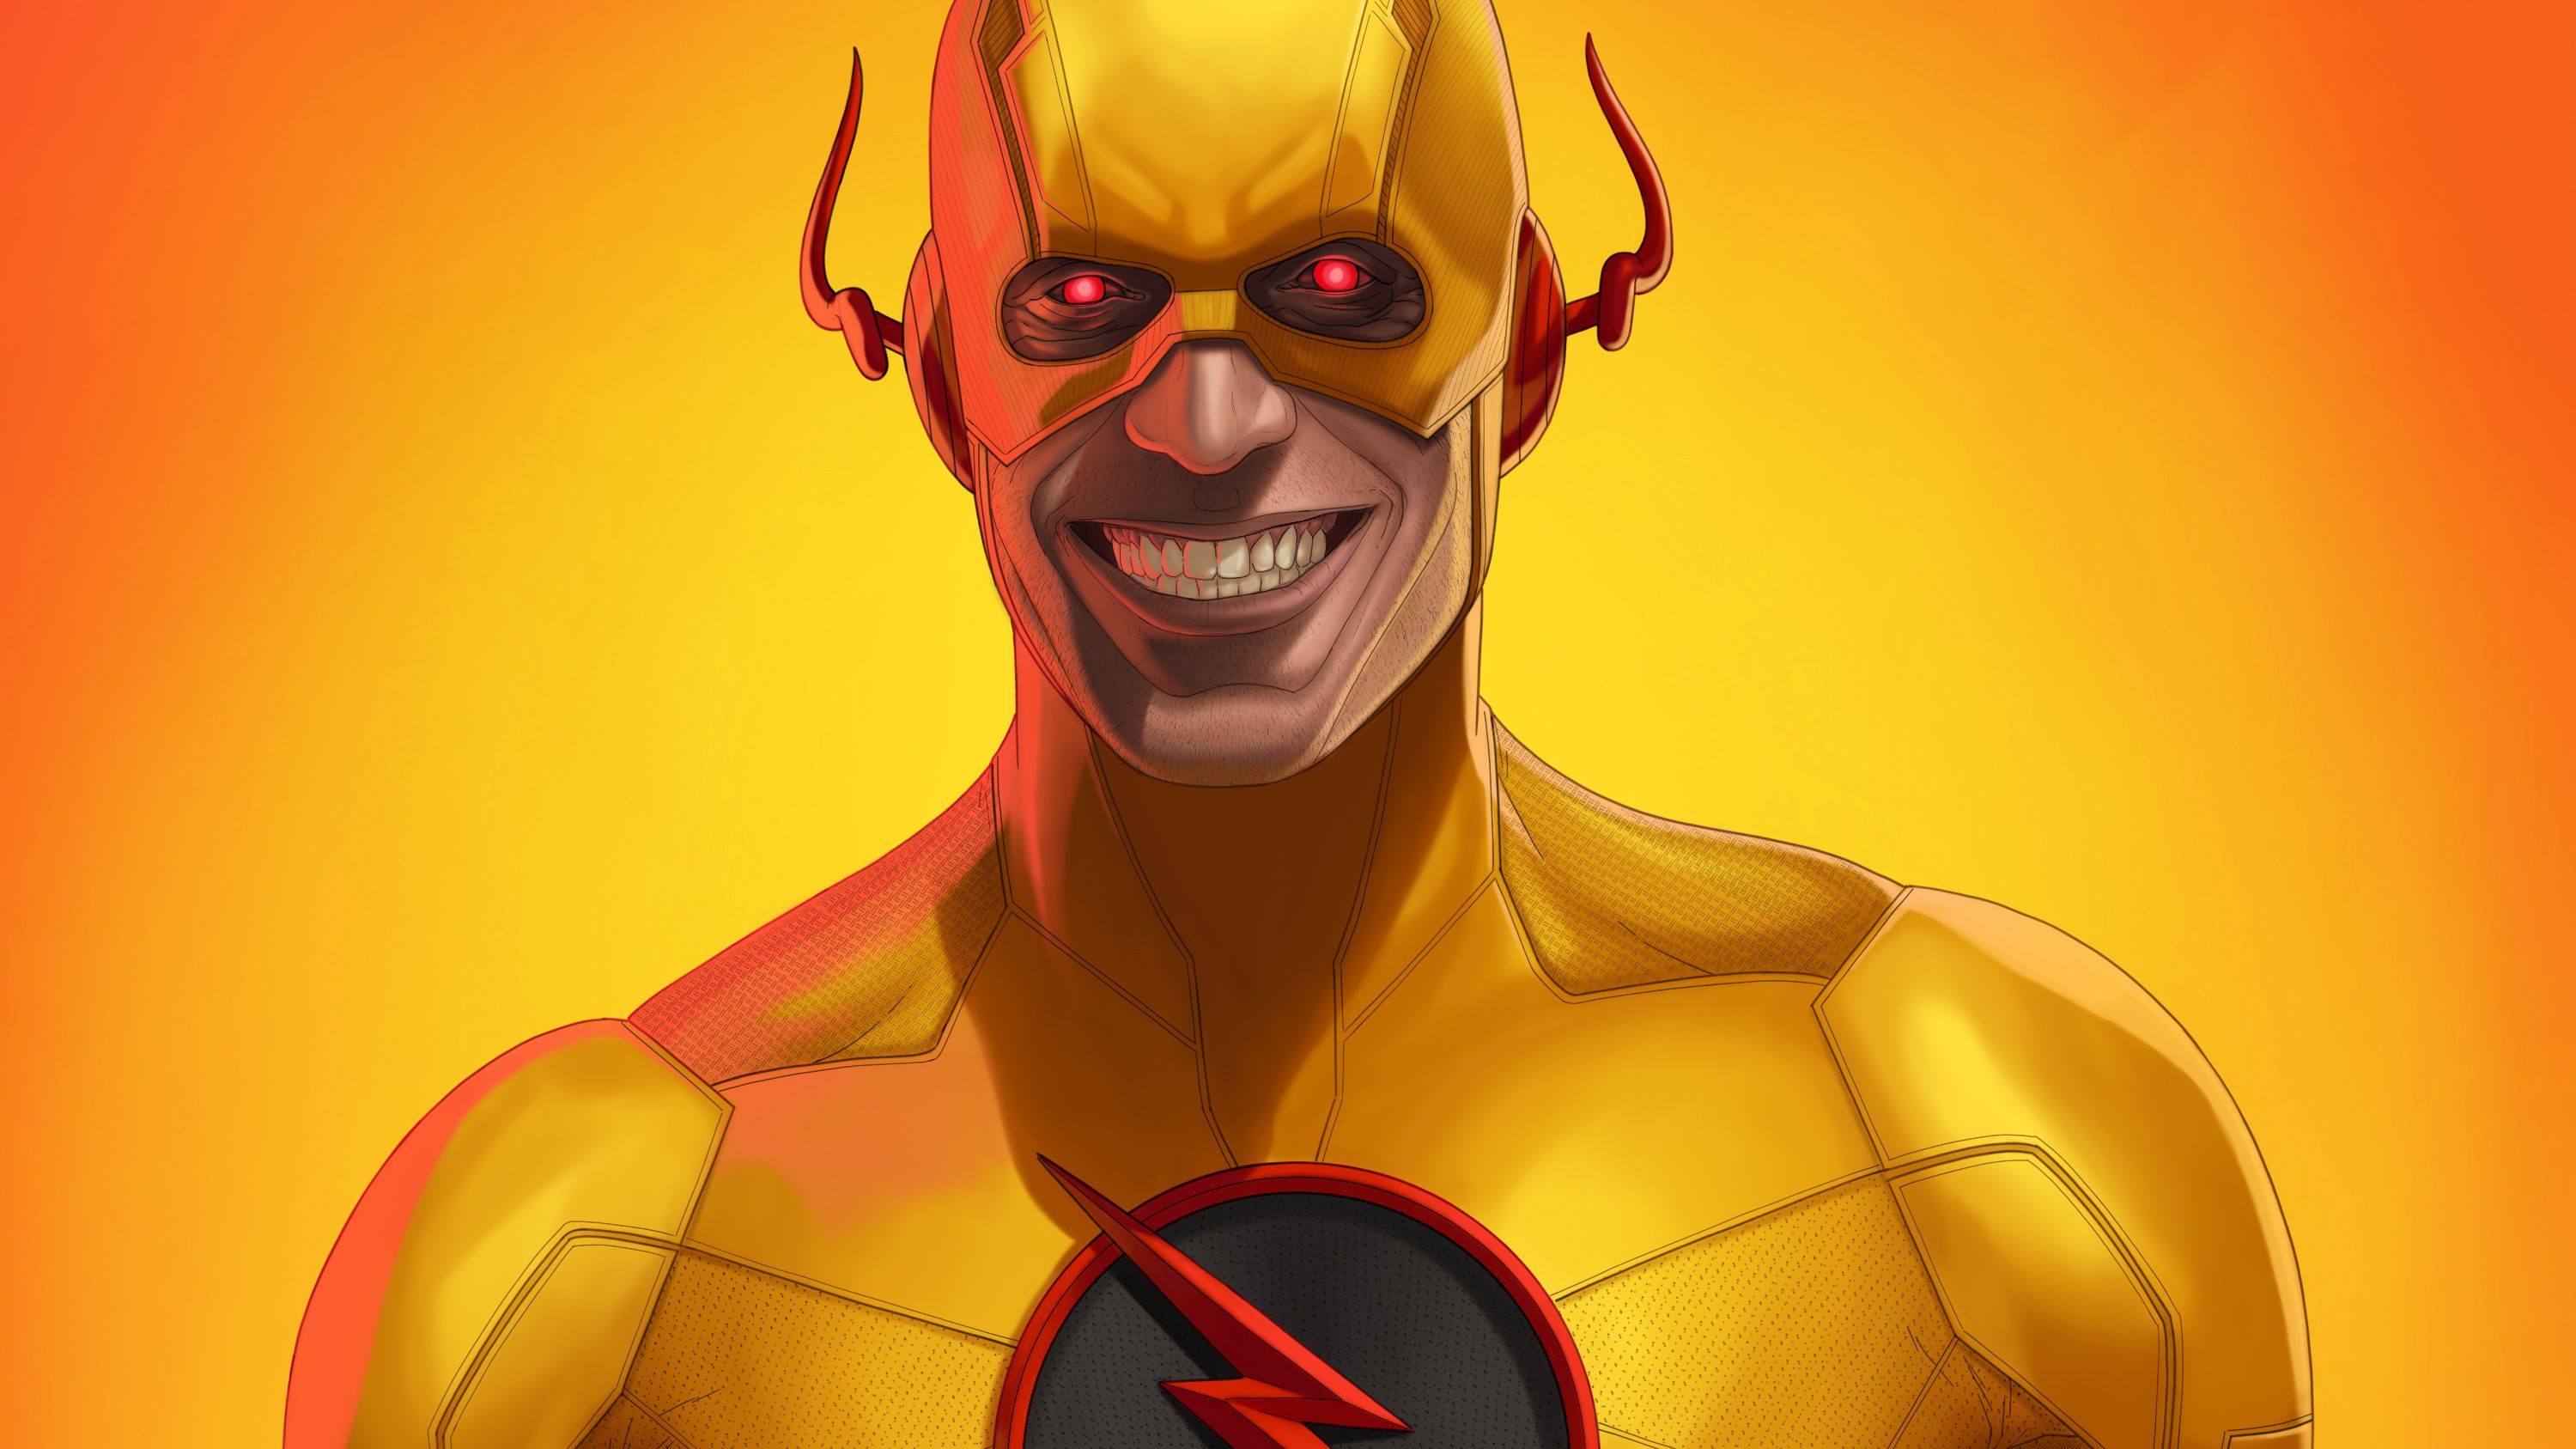 Reverse Flash Art, HD Superheroes, 4k Wallpaper, Image, Background, Photo and Picture